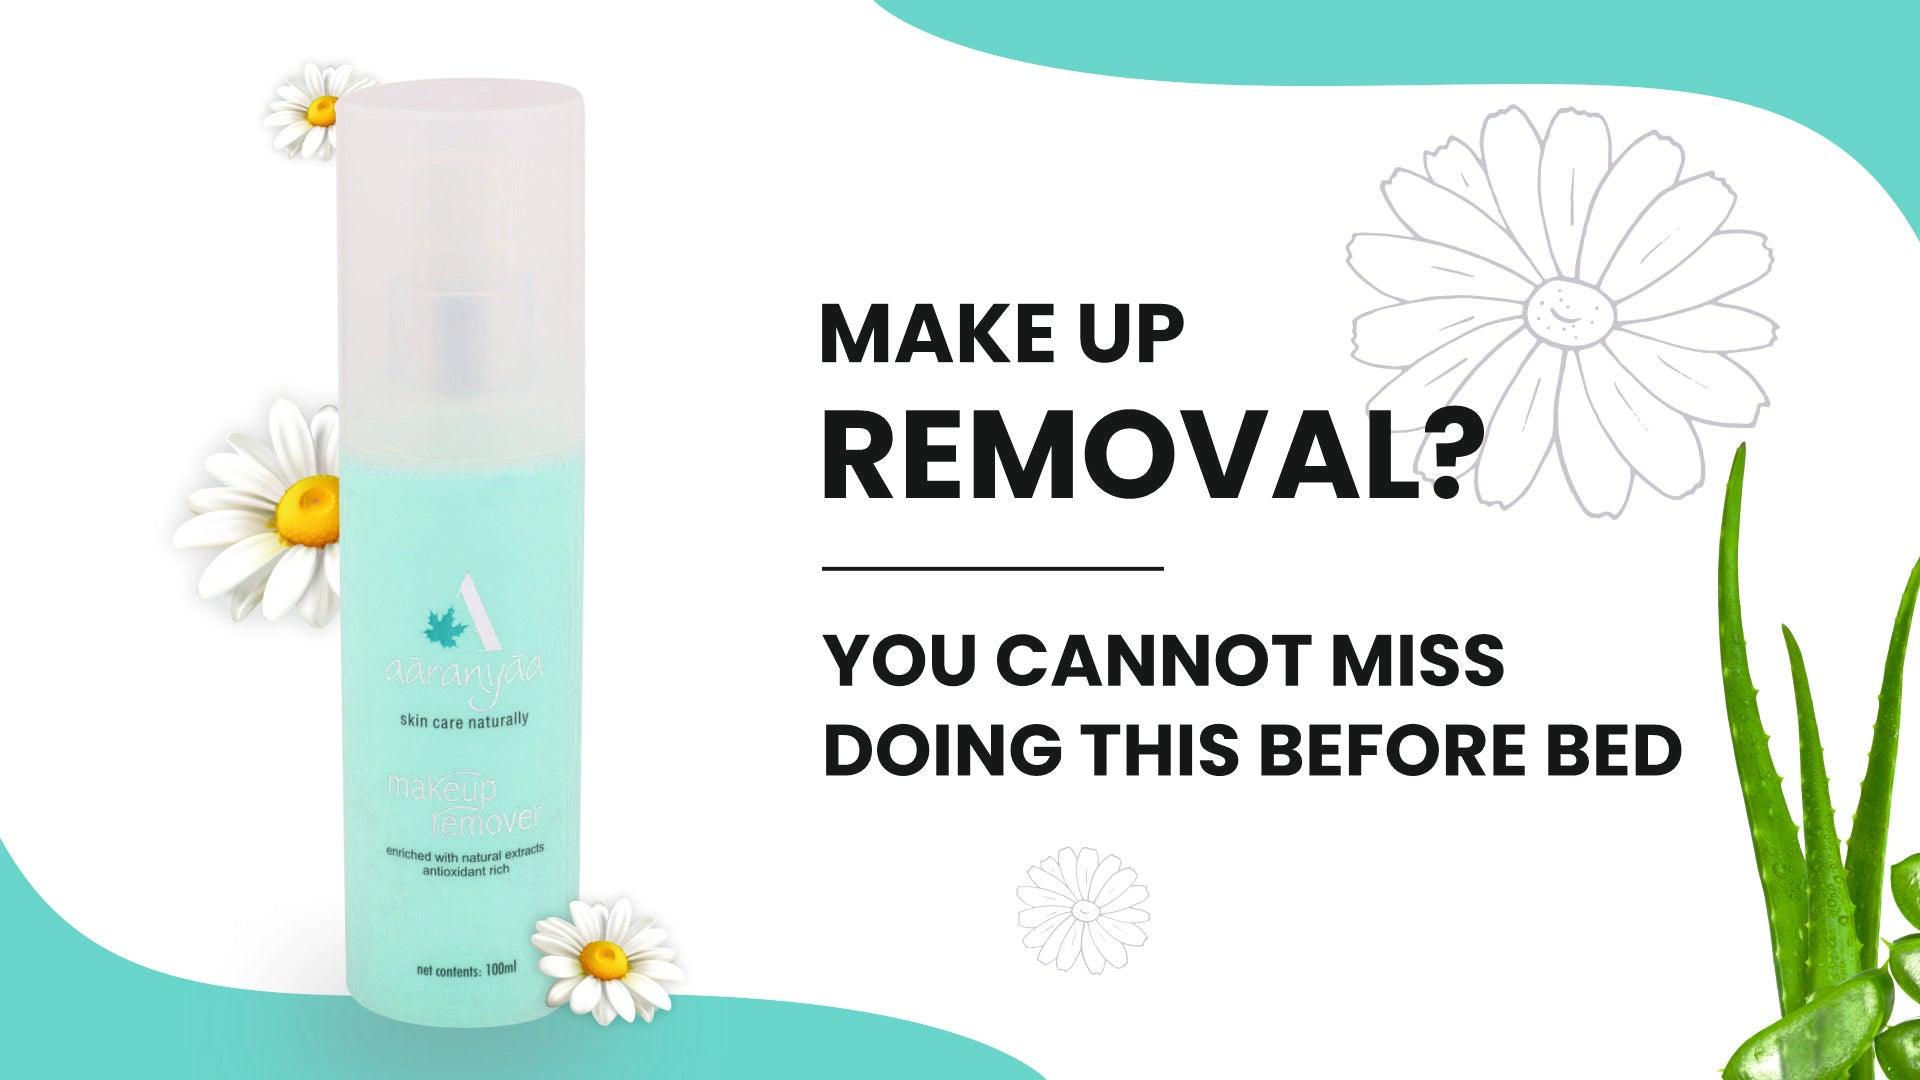 MAKE UP REMOVAL? YOU CANNOT MISS DOING THIS BEFORE BED - aaranyaa skincare